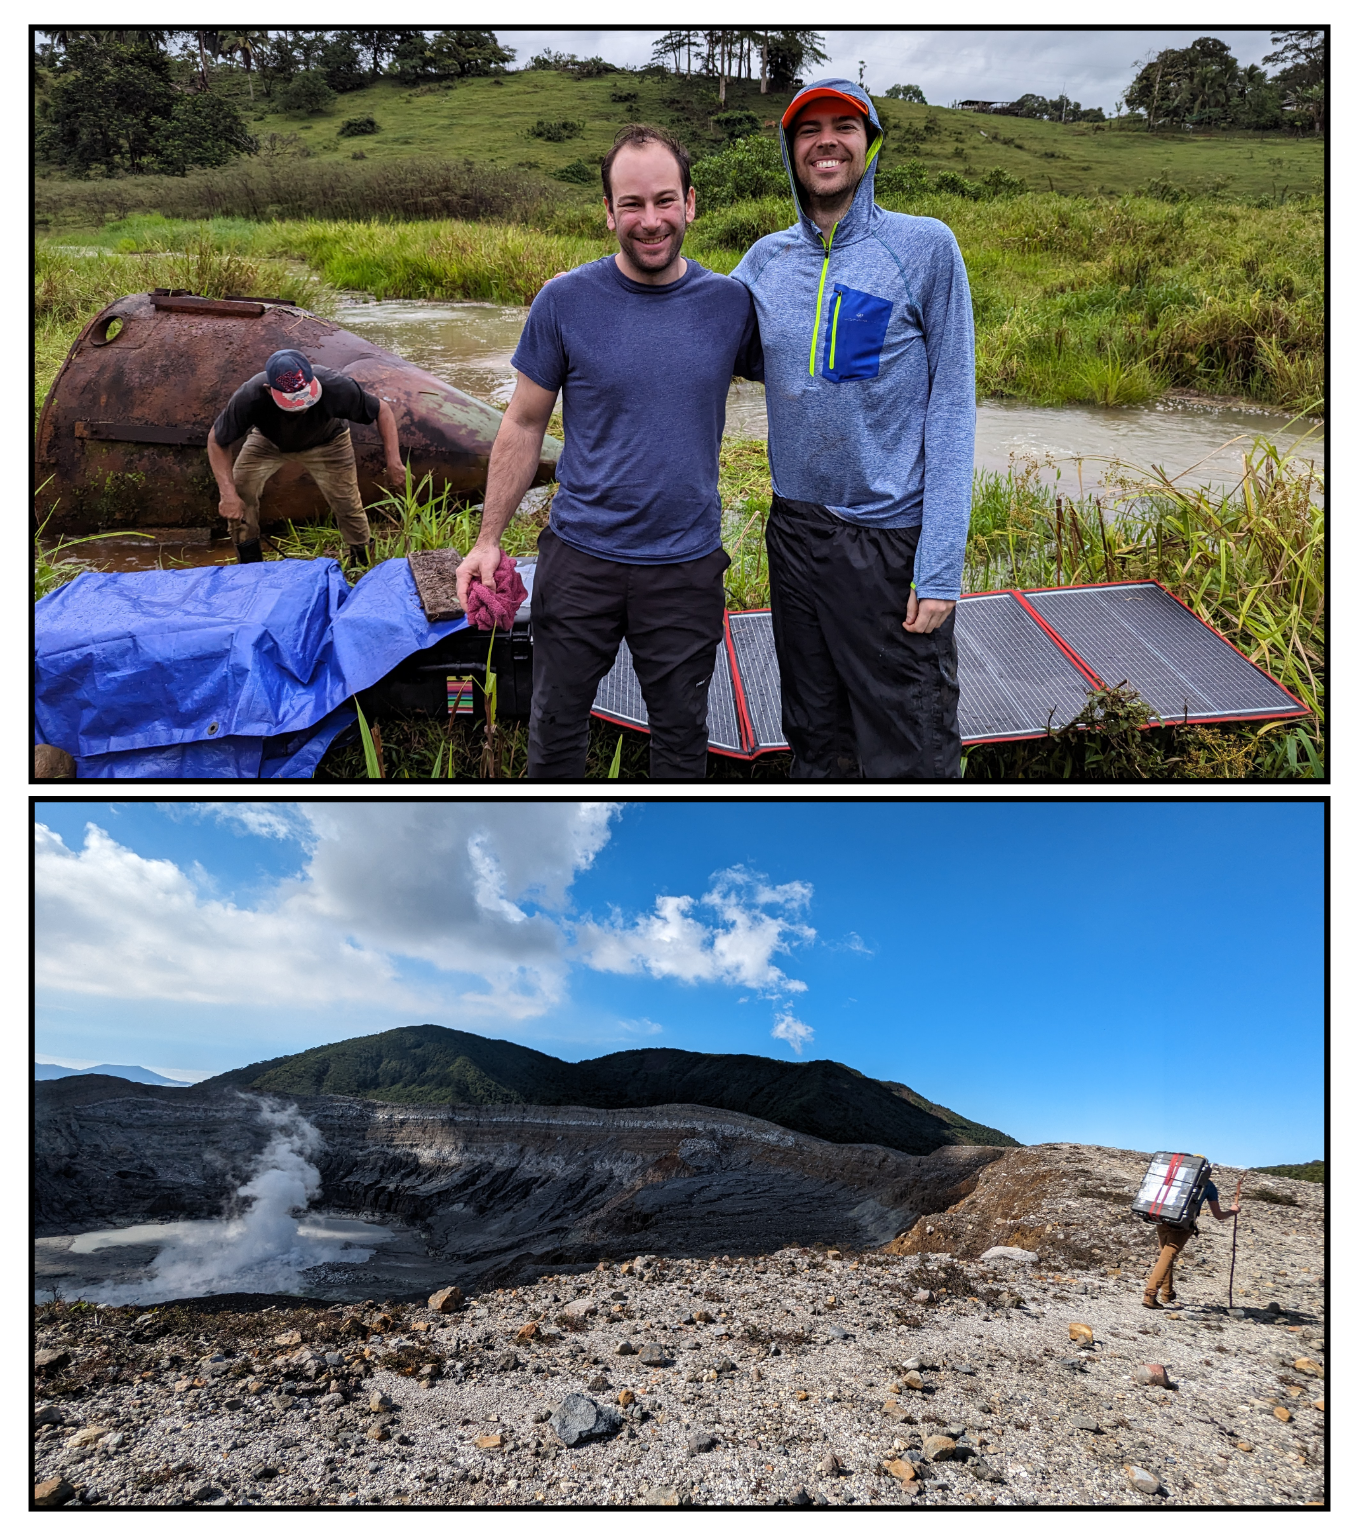 Team miniRUEDI. Top: Alan Seltzer and Mike Broadley in front of the deployed miniRUEDI system at Pompilio Springs, in the back arc. Bottom: The miniRUEDI system being hiked along the Poás crater rim prior to deployment above the fumarole bank. The Laguna Caliente and plume are visible to the left, with the Von Frantzius peak in the background.